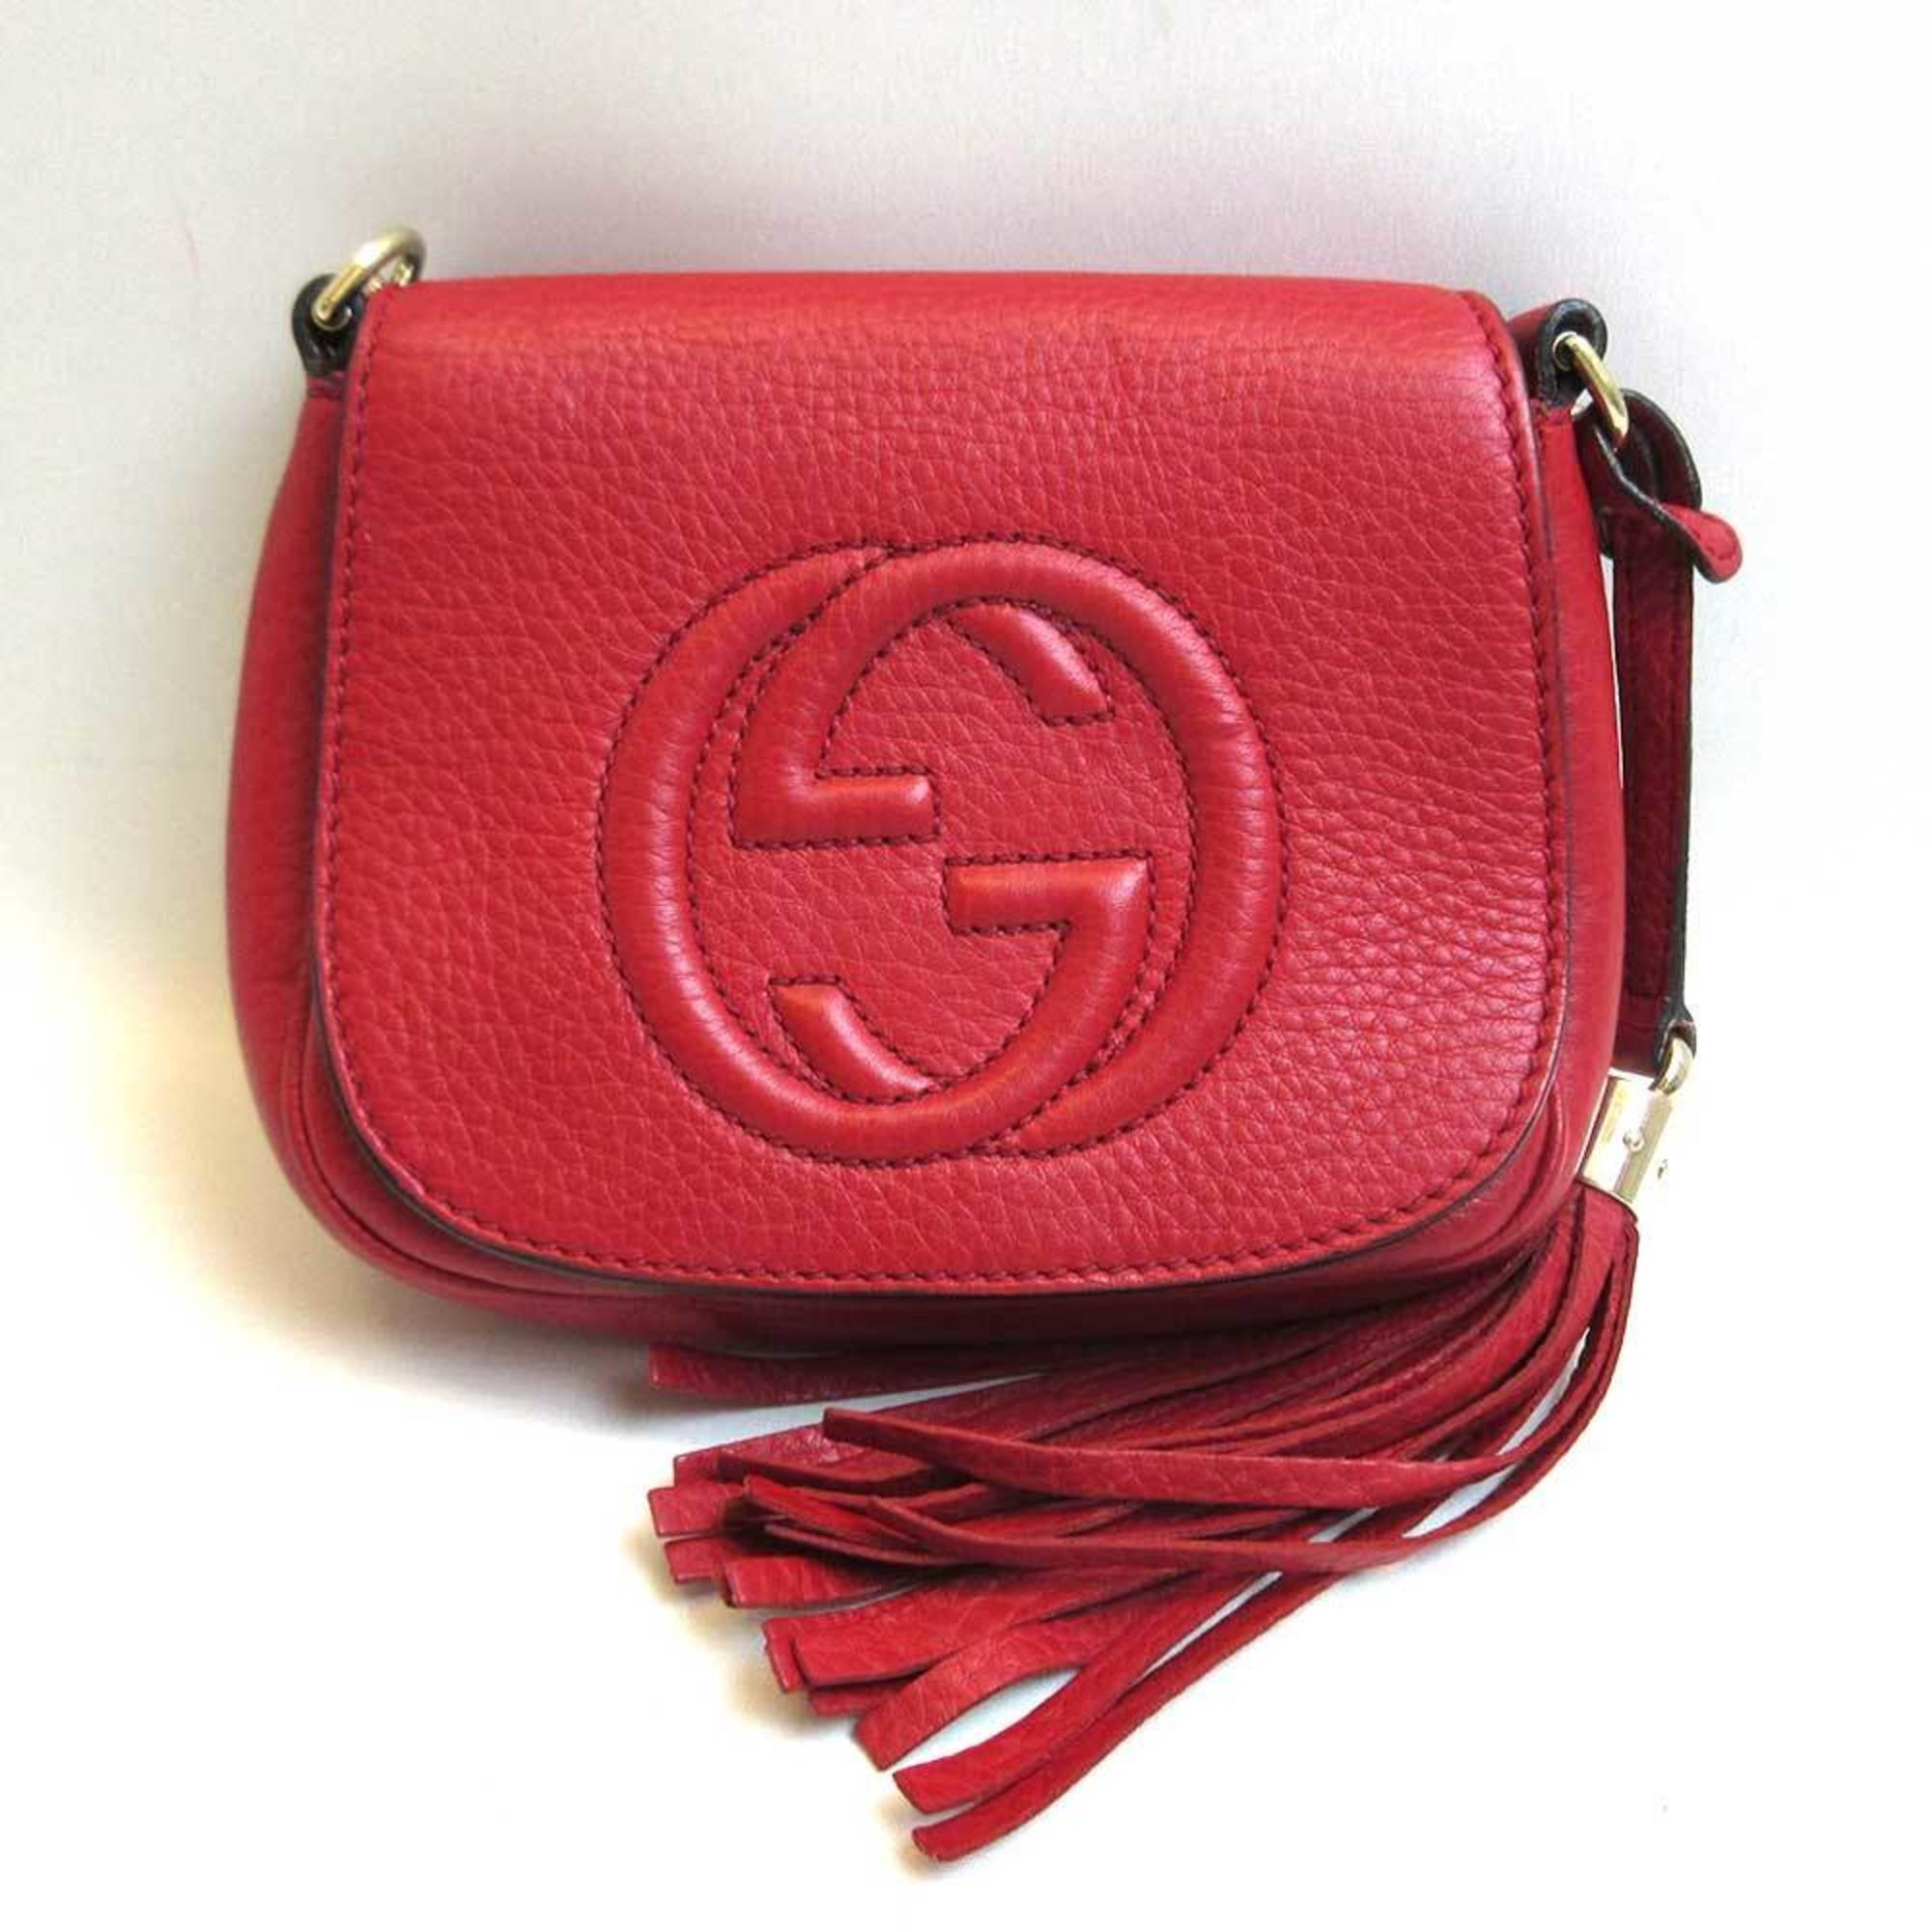 Red Gucci Soho camera bag with GG logo on the front - AGL2121 –  LuxuryPromise